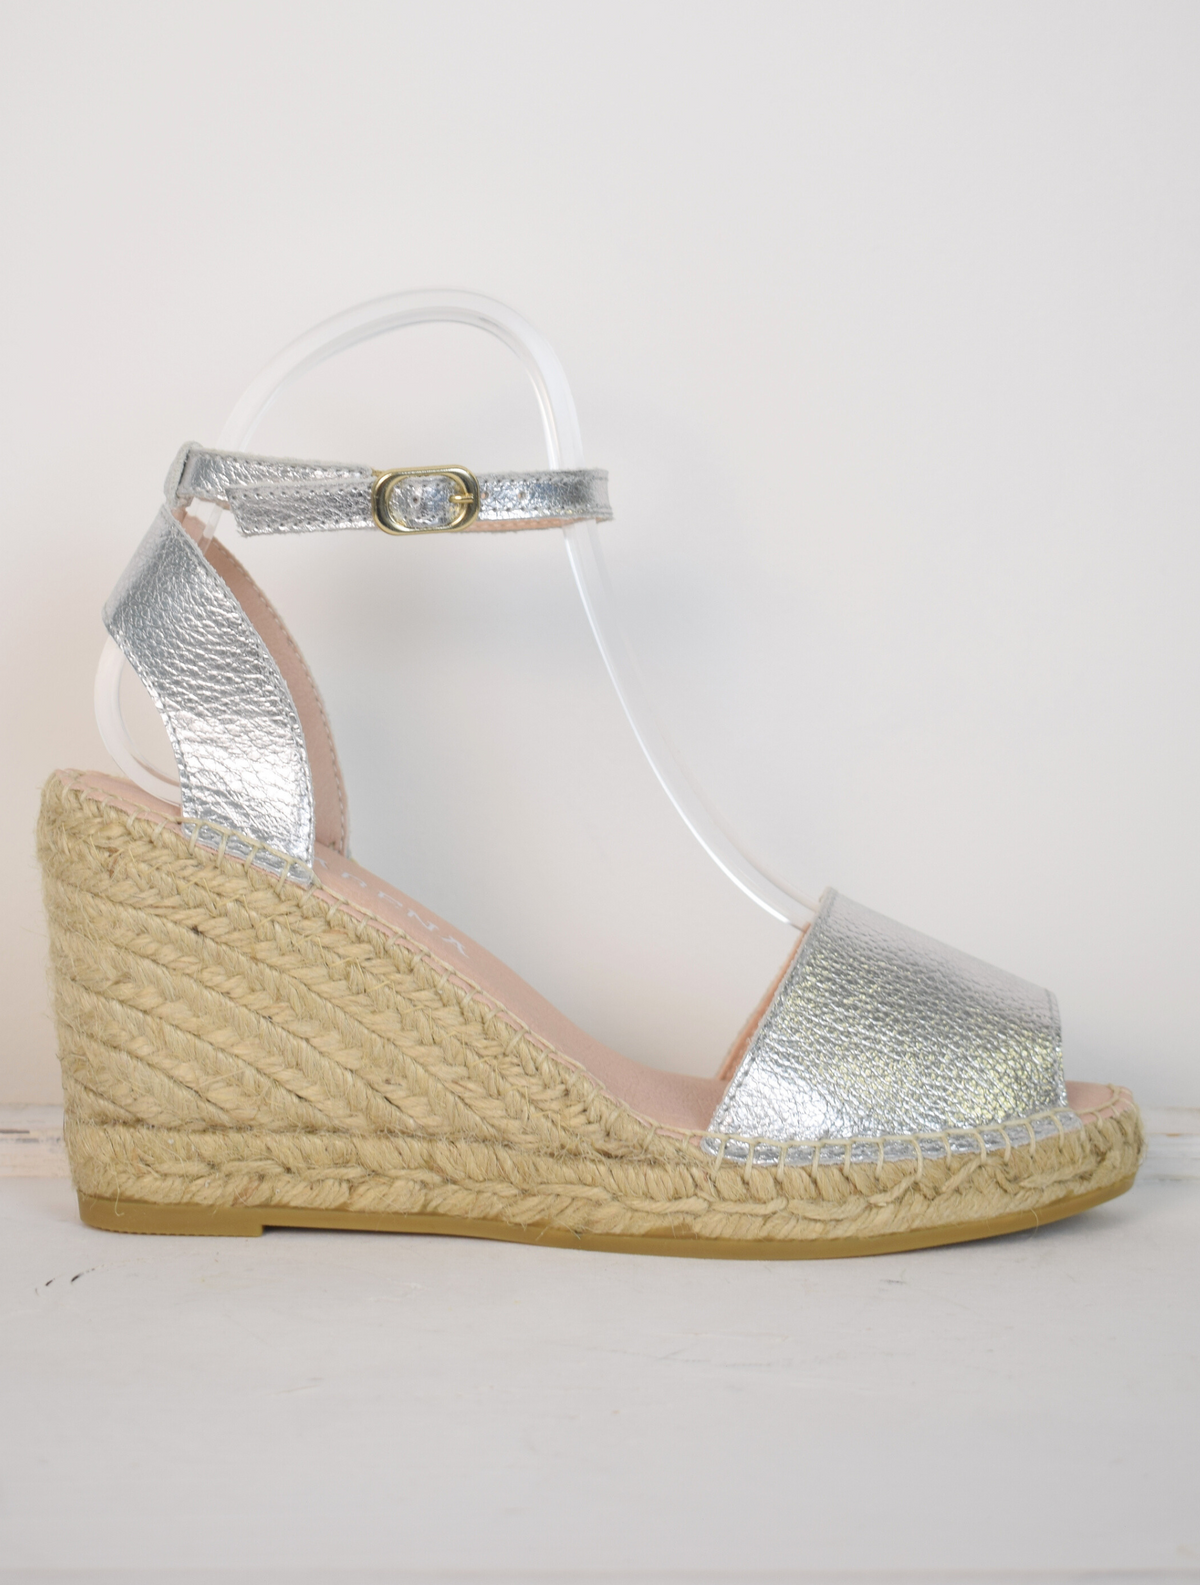 A silver wedge sandal with open toes and an ankle strap 